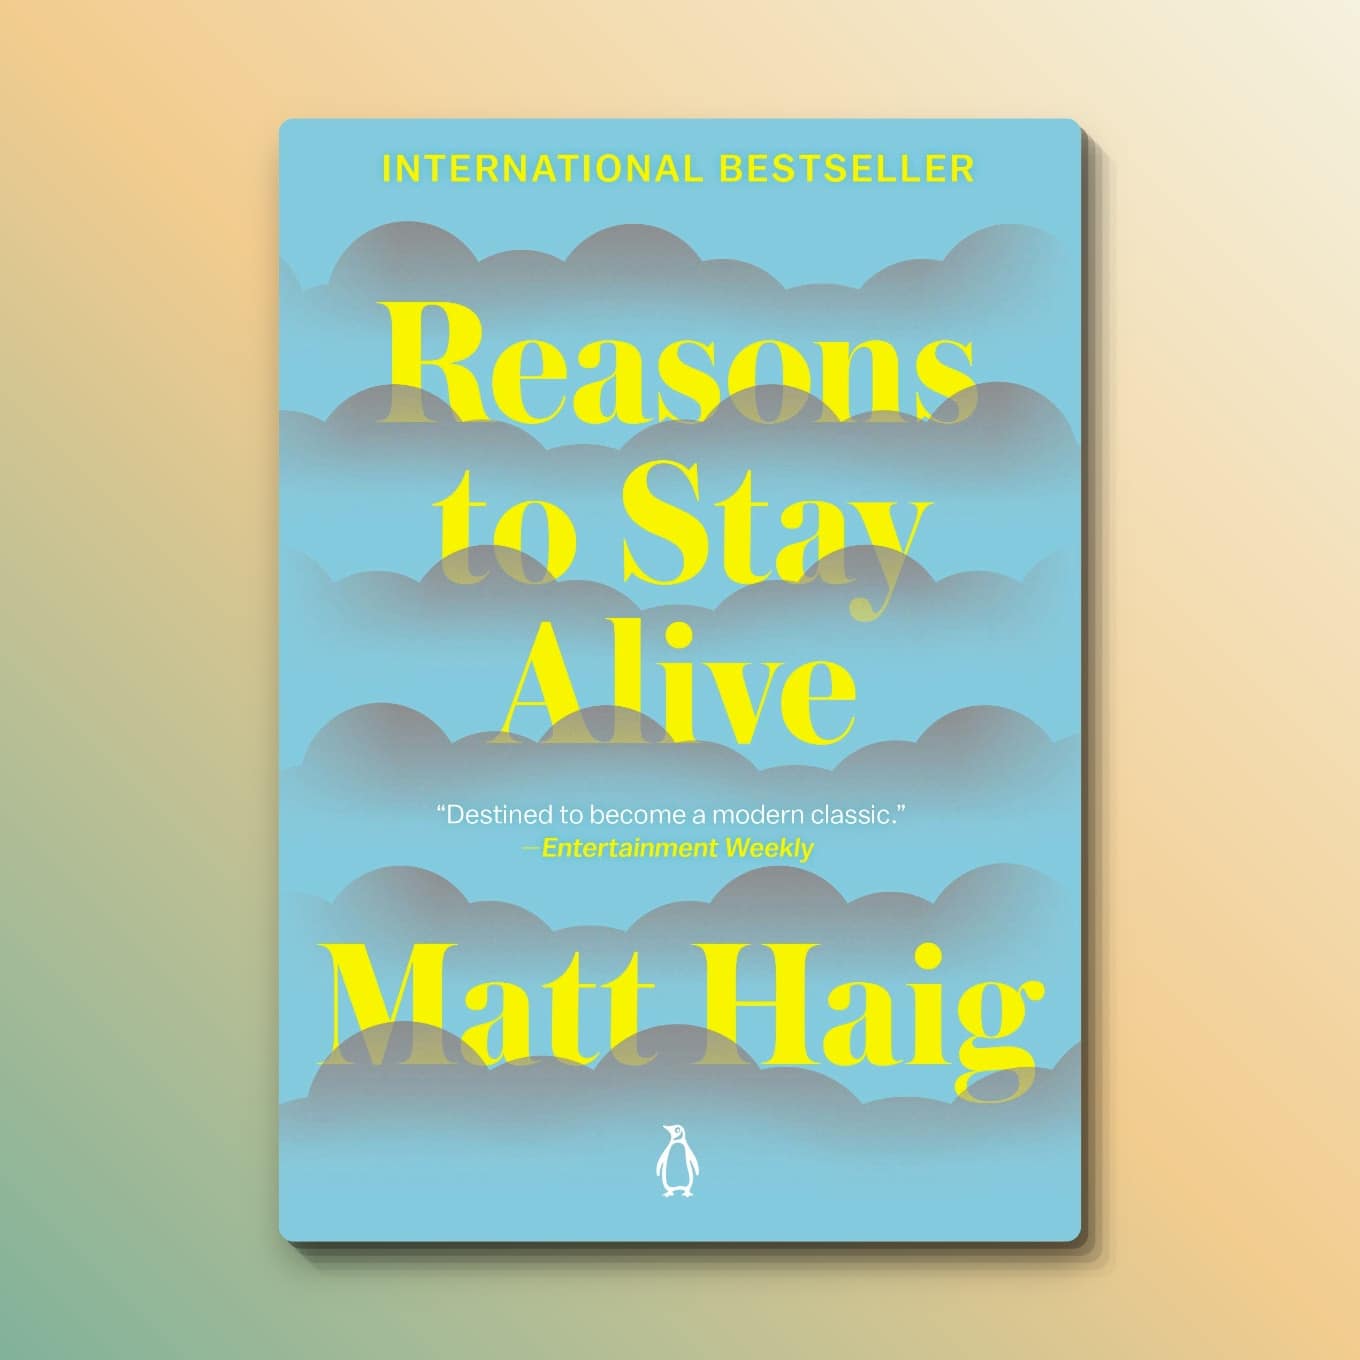 “Reasons to Stay Alive” by Matt Haig